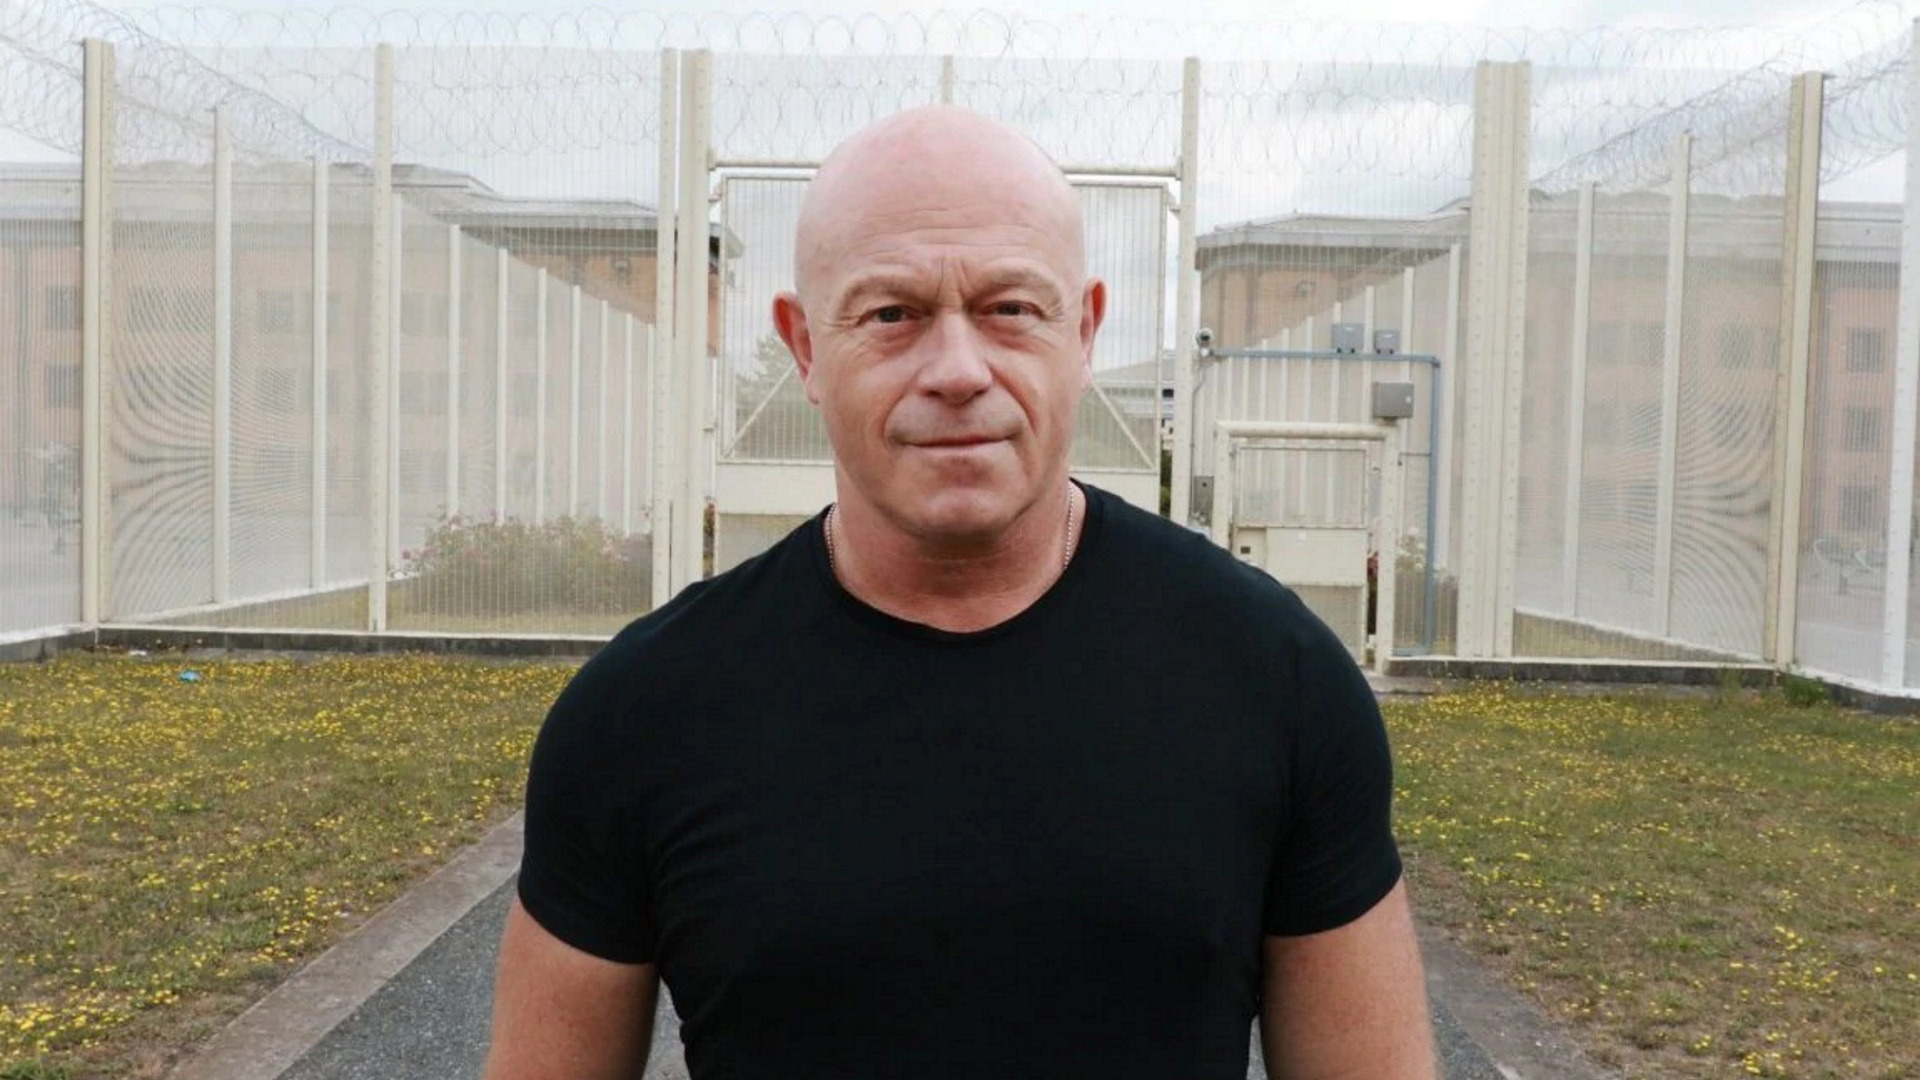 Show Welcome to HMP Belmarsh with Ross Kemp